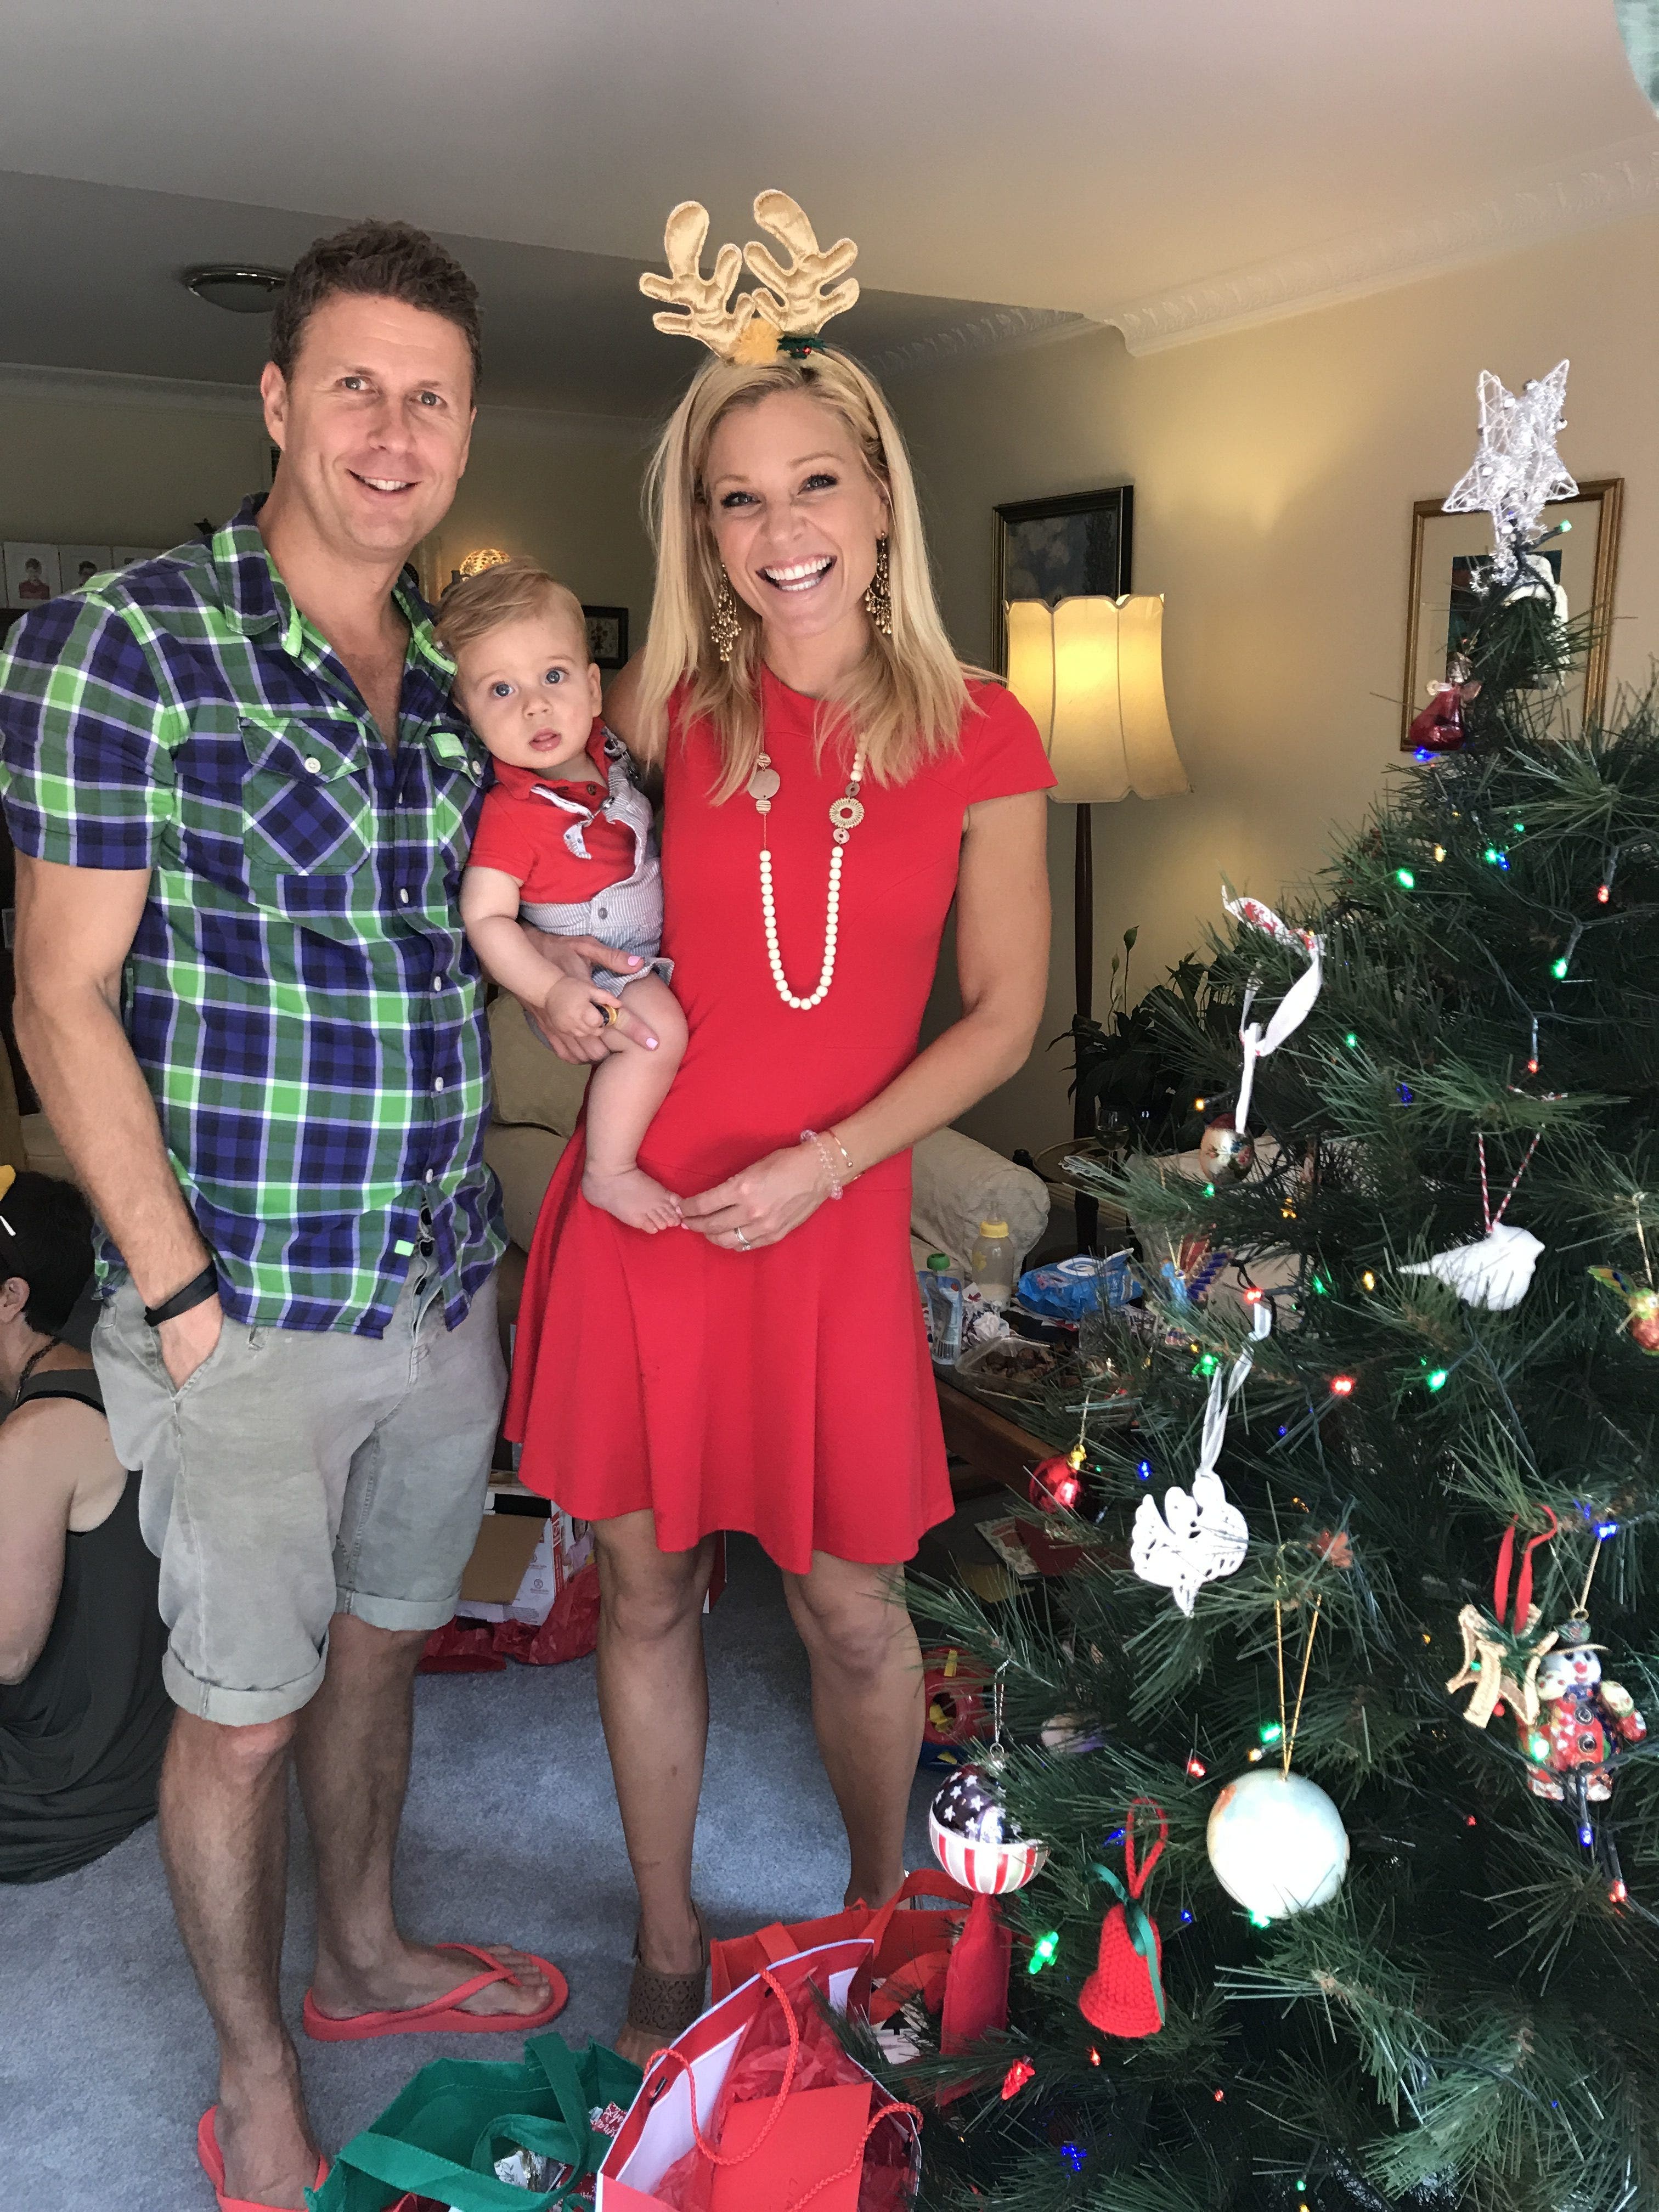 Anna Kooiman: Fox News has brought me home for the holidays from